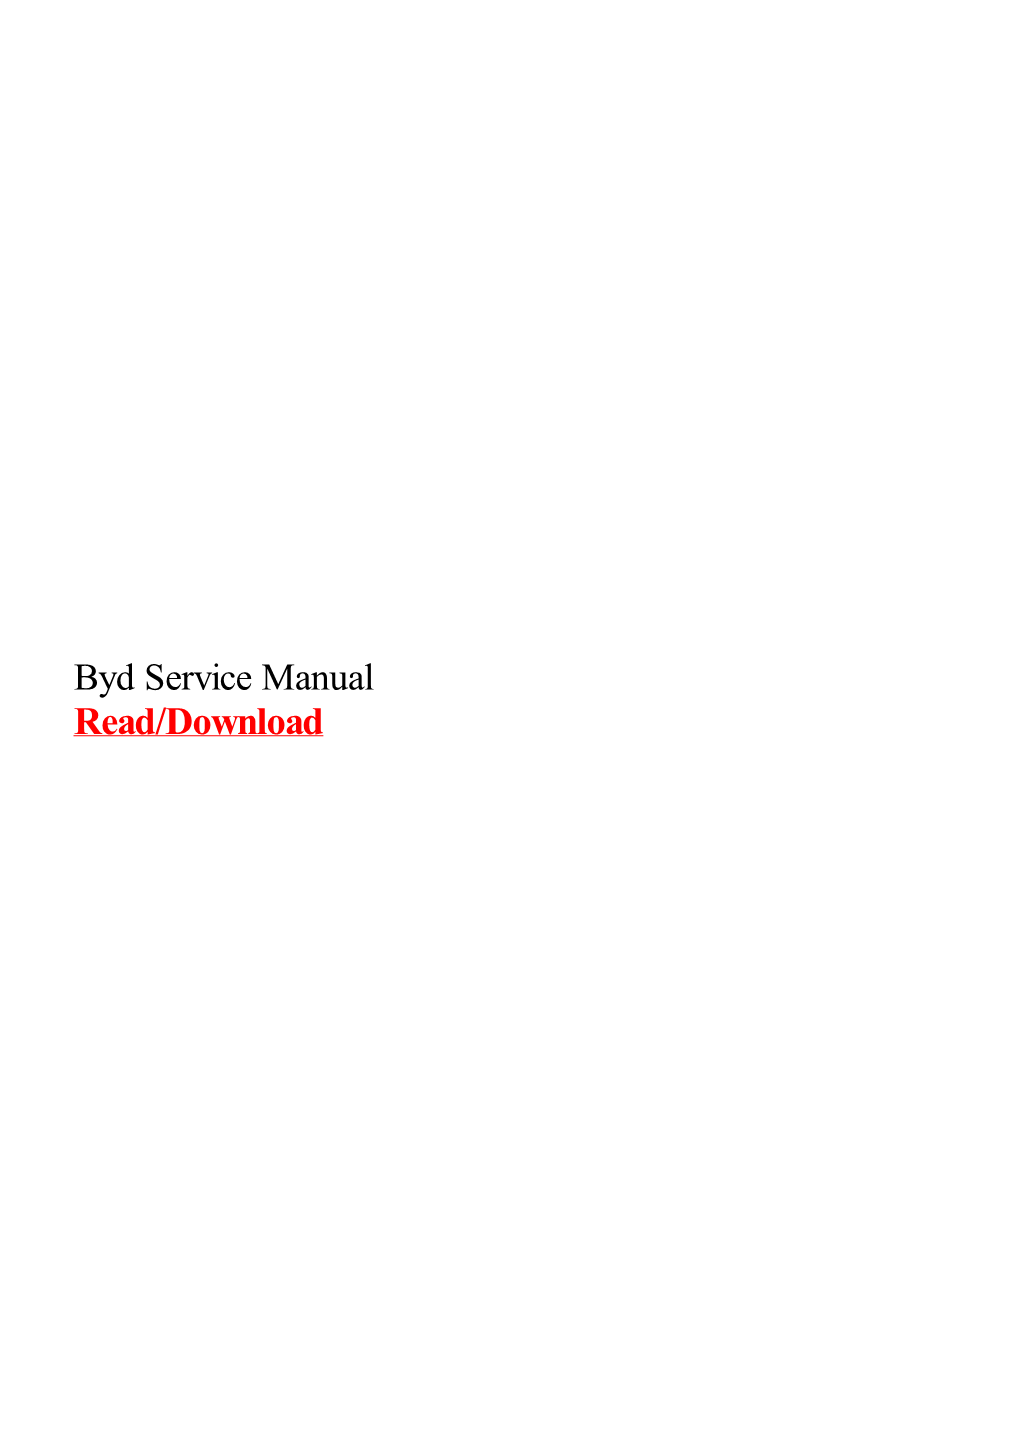 Byd Service Manual